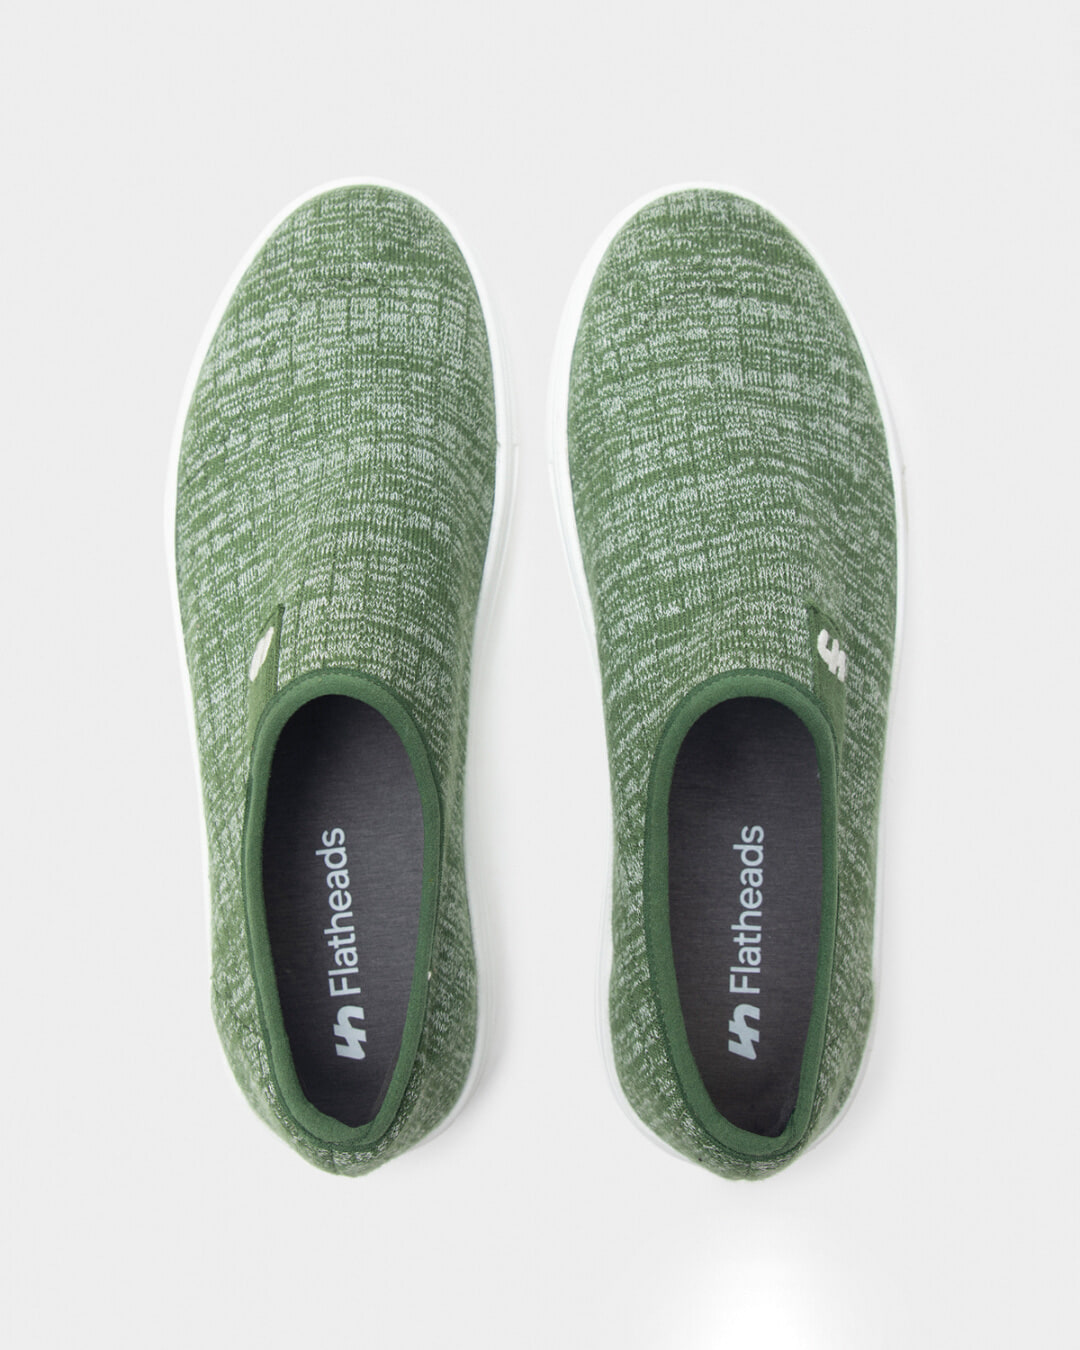 New Troos - Bamboo Loafers - Green Melange By Flatheads | Casual Shoes for  Men - Flatheads UAE